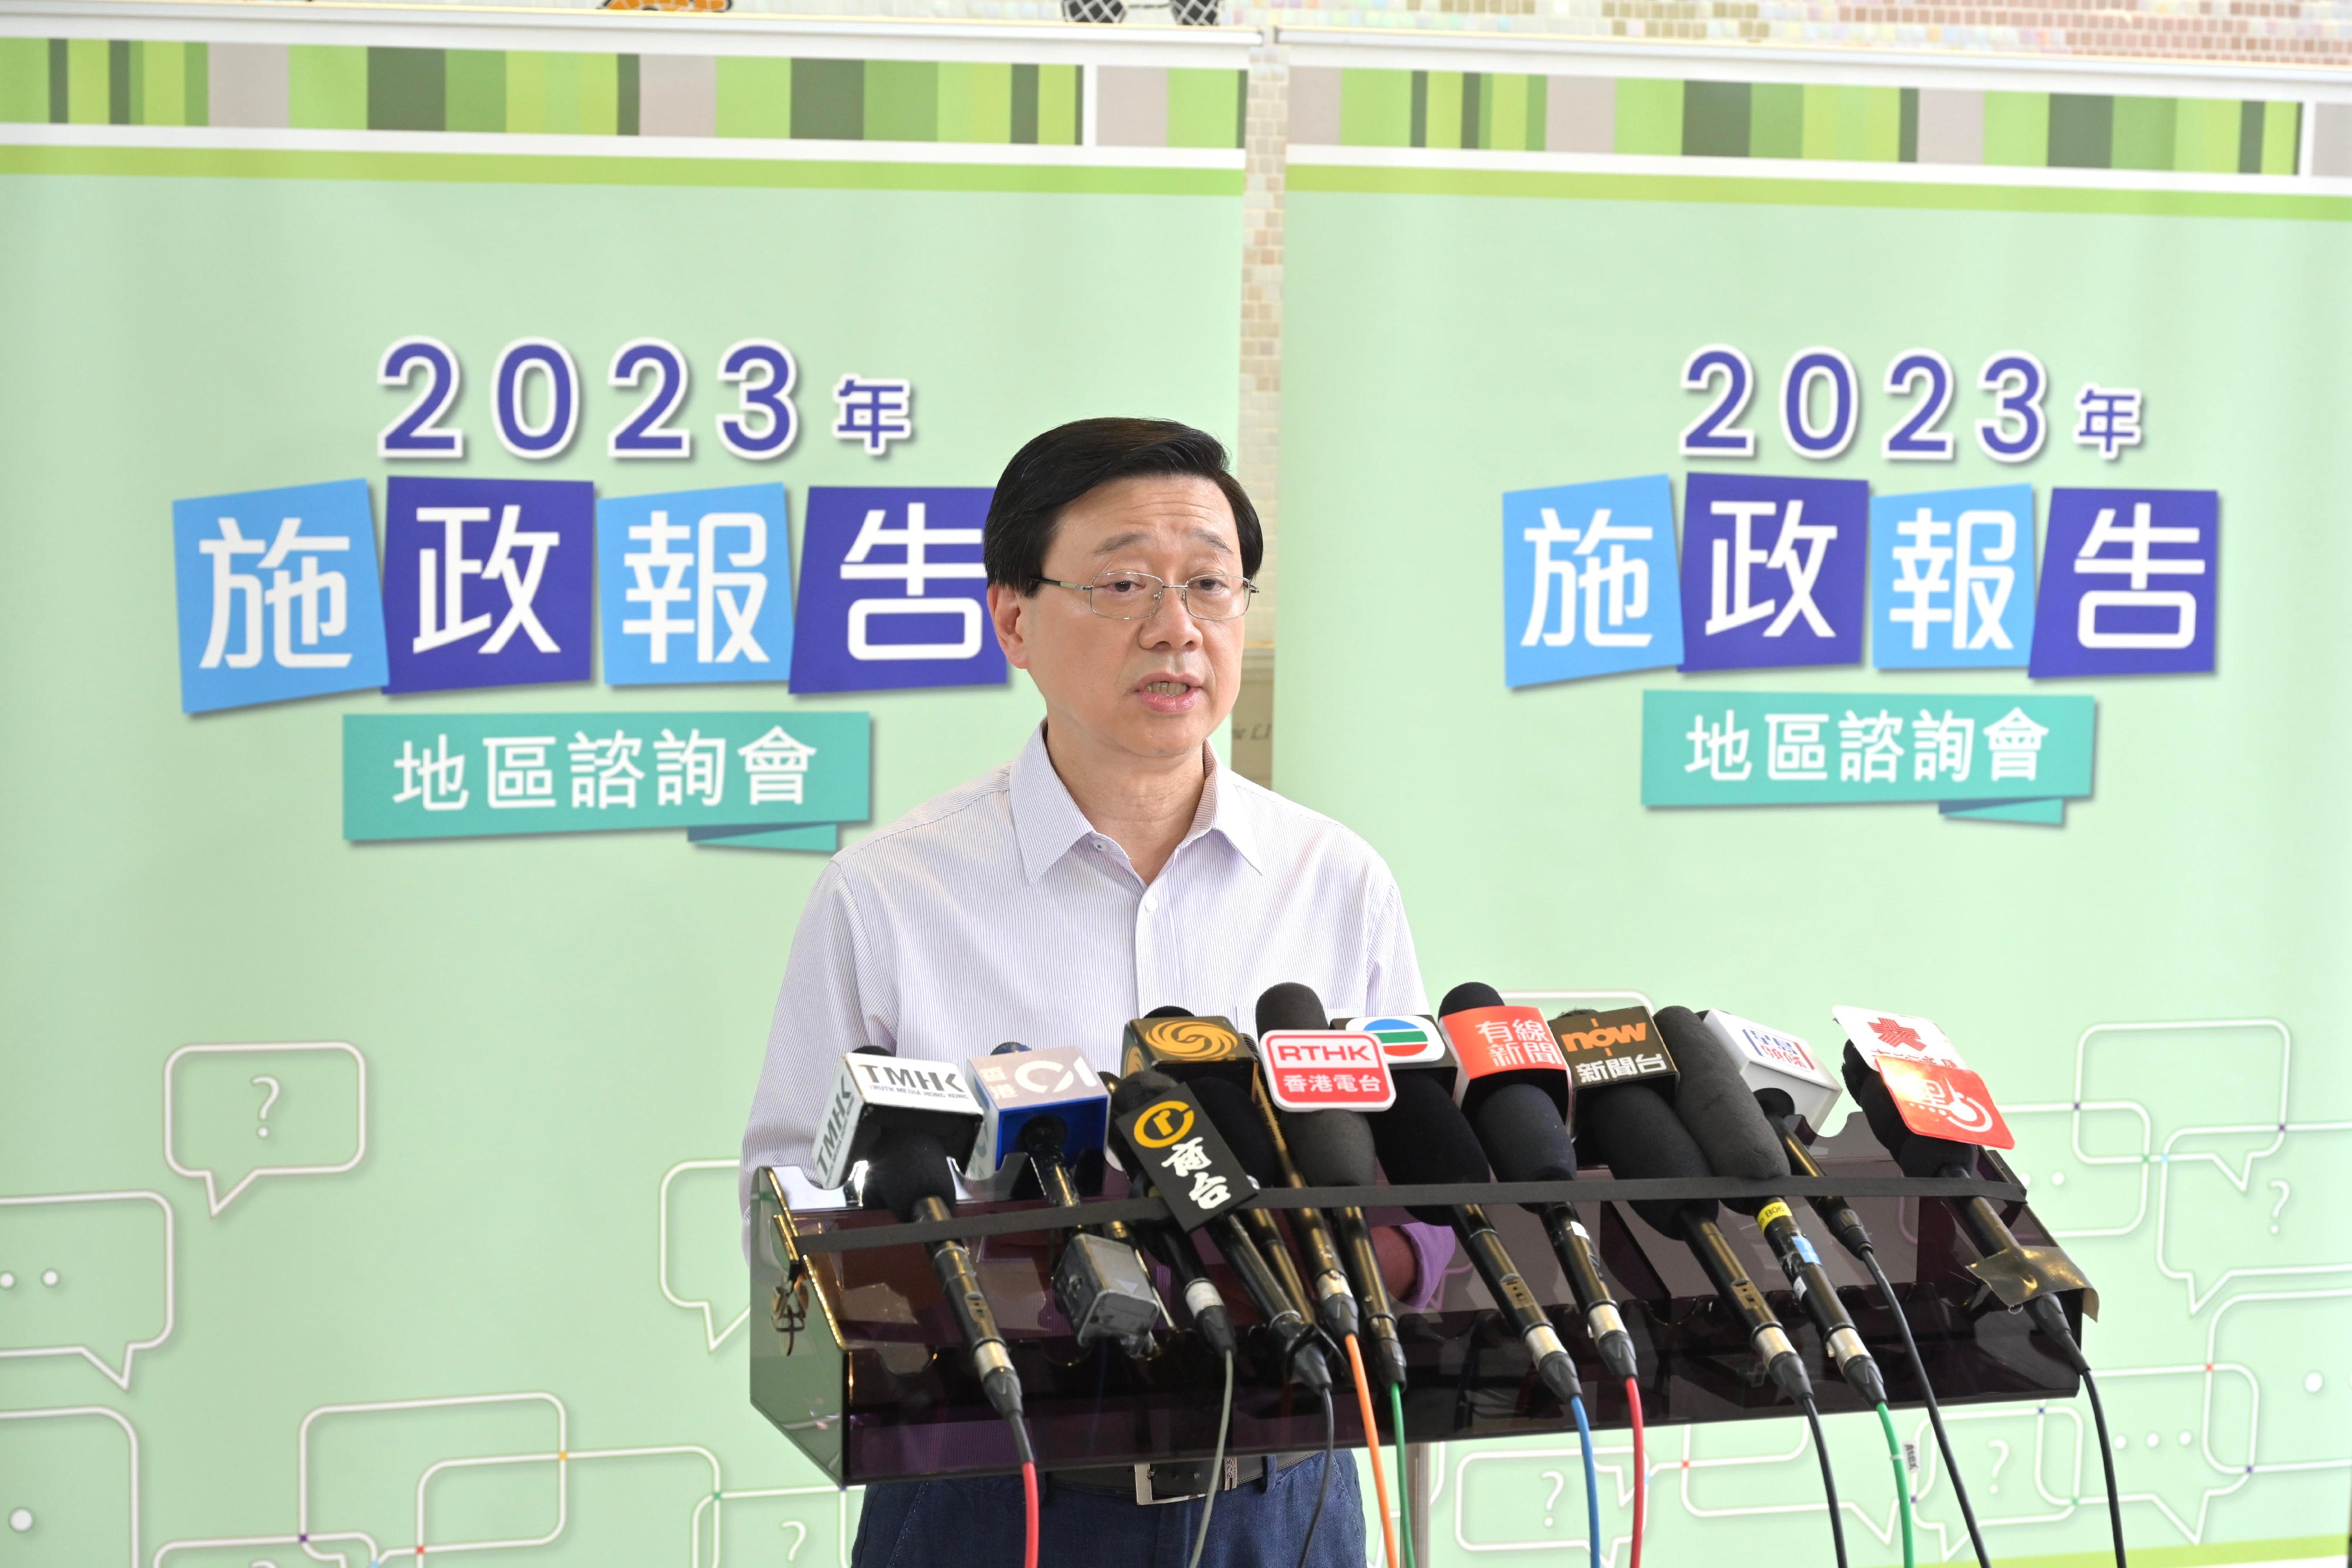 The Chief Executive, Mr John Lee, attended the second 2023 Policy Address District Forum with Principal Officials this morning (August 27) to listen to views and suggestions of local community members on the upcoming Policy Address. Photo shows Mr Lee meeting the media after the District Forum.